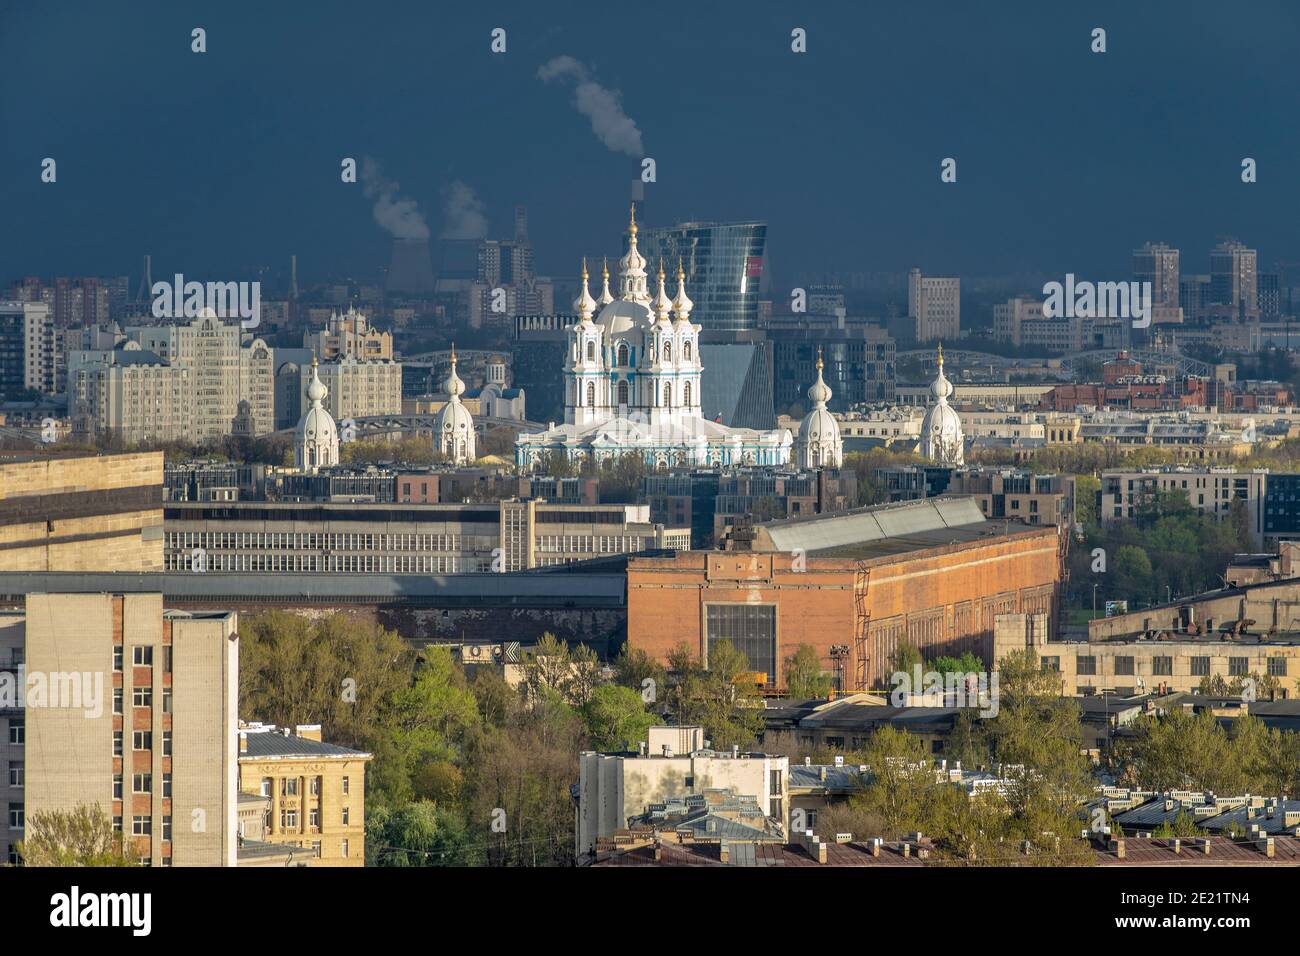 St. Petersburg from bird's-eye view Smolny convent, temples, factories, buildings Stock Photo